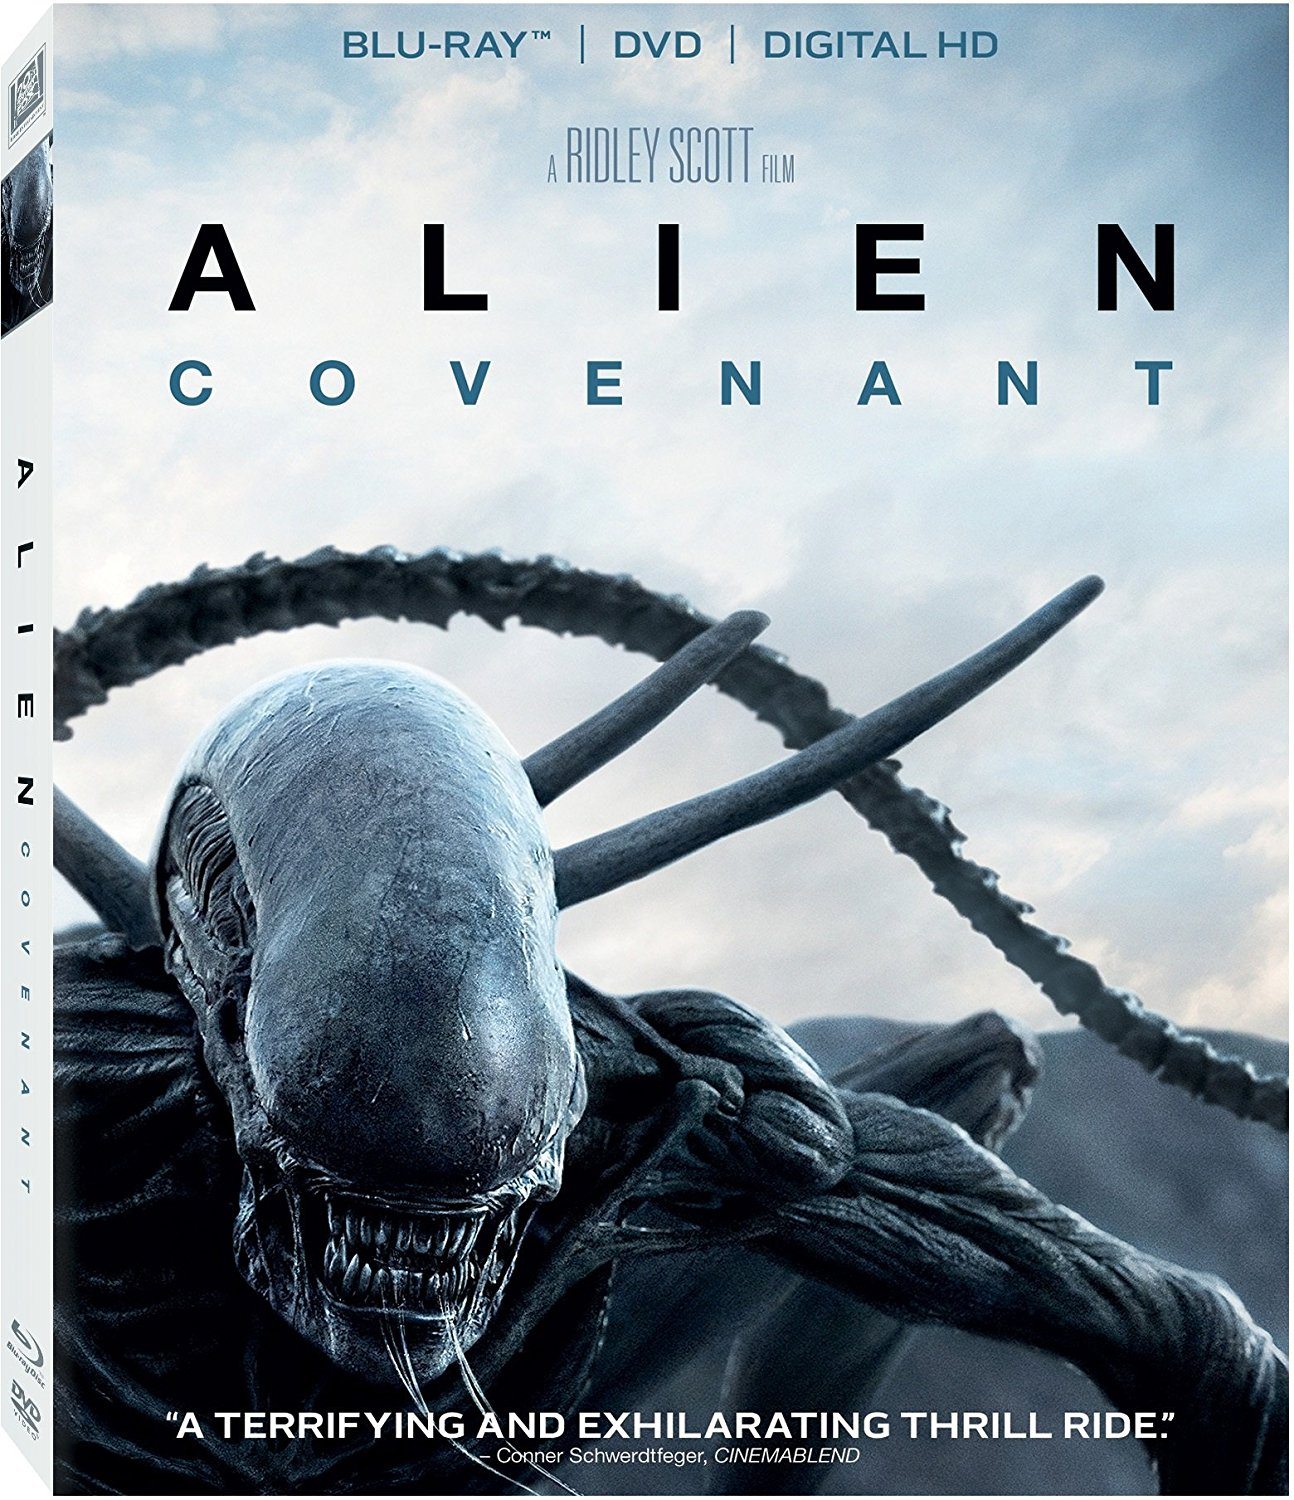 Blu-ray Review - Alien: Covenant (2017)